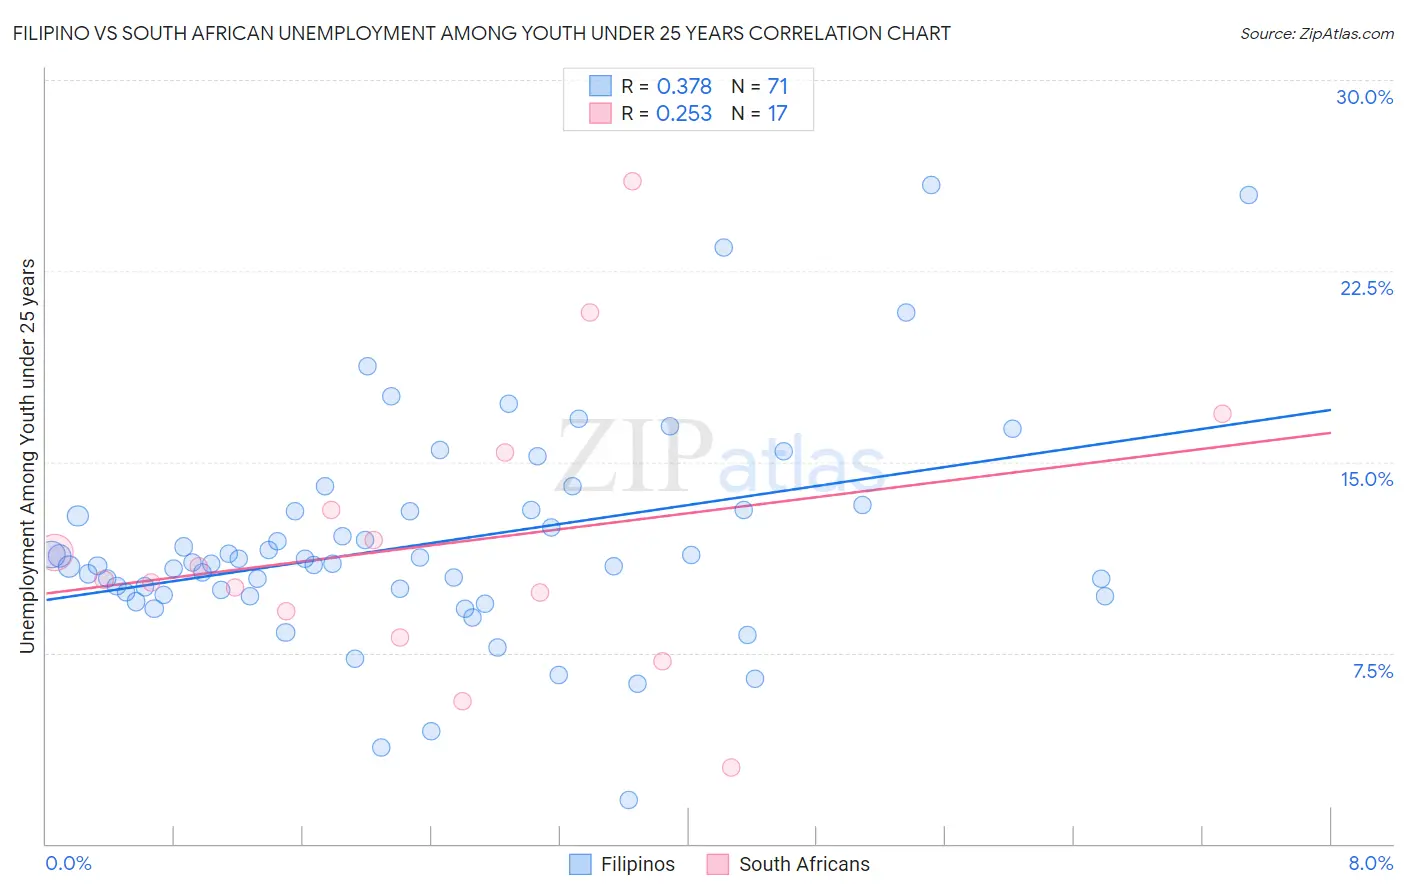 Filipino vs South African Unemployment Among Youth under 25 years